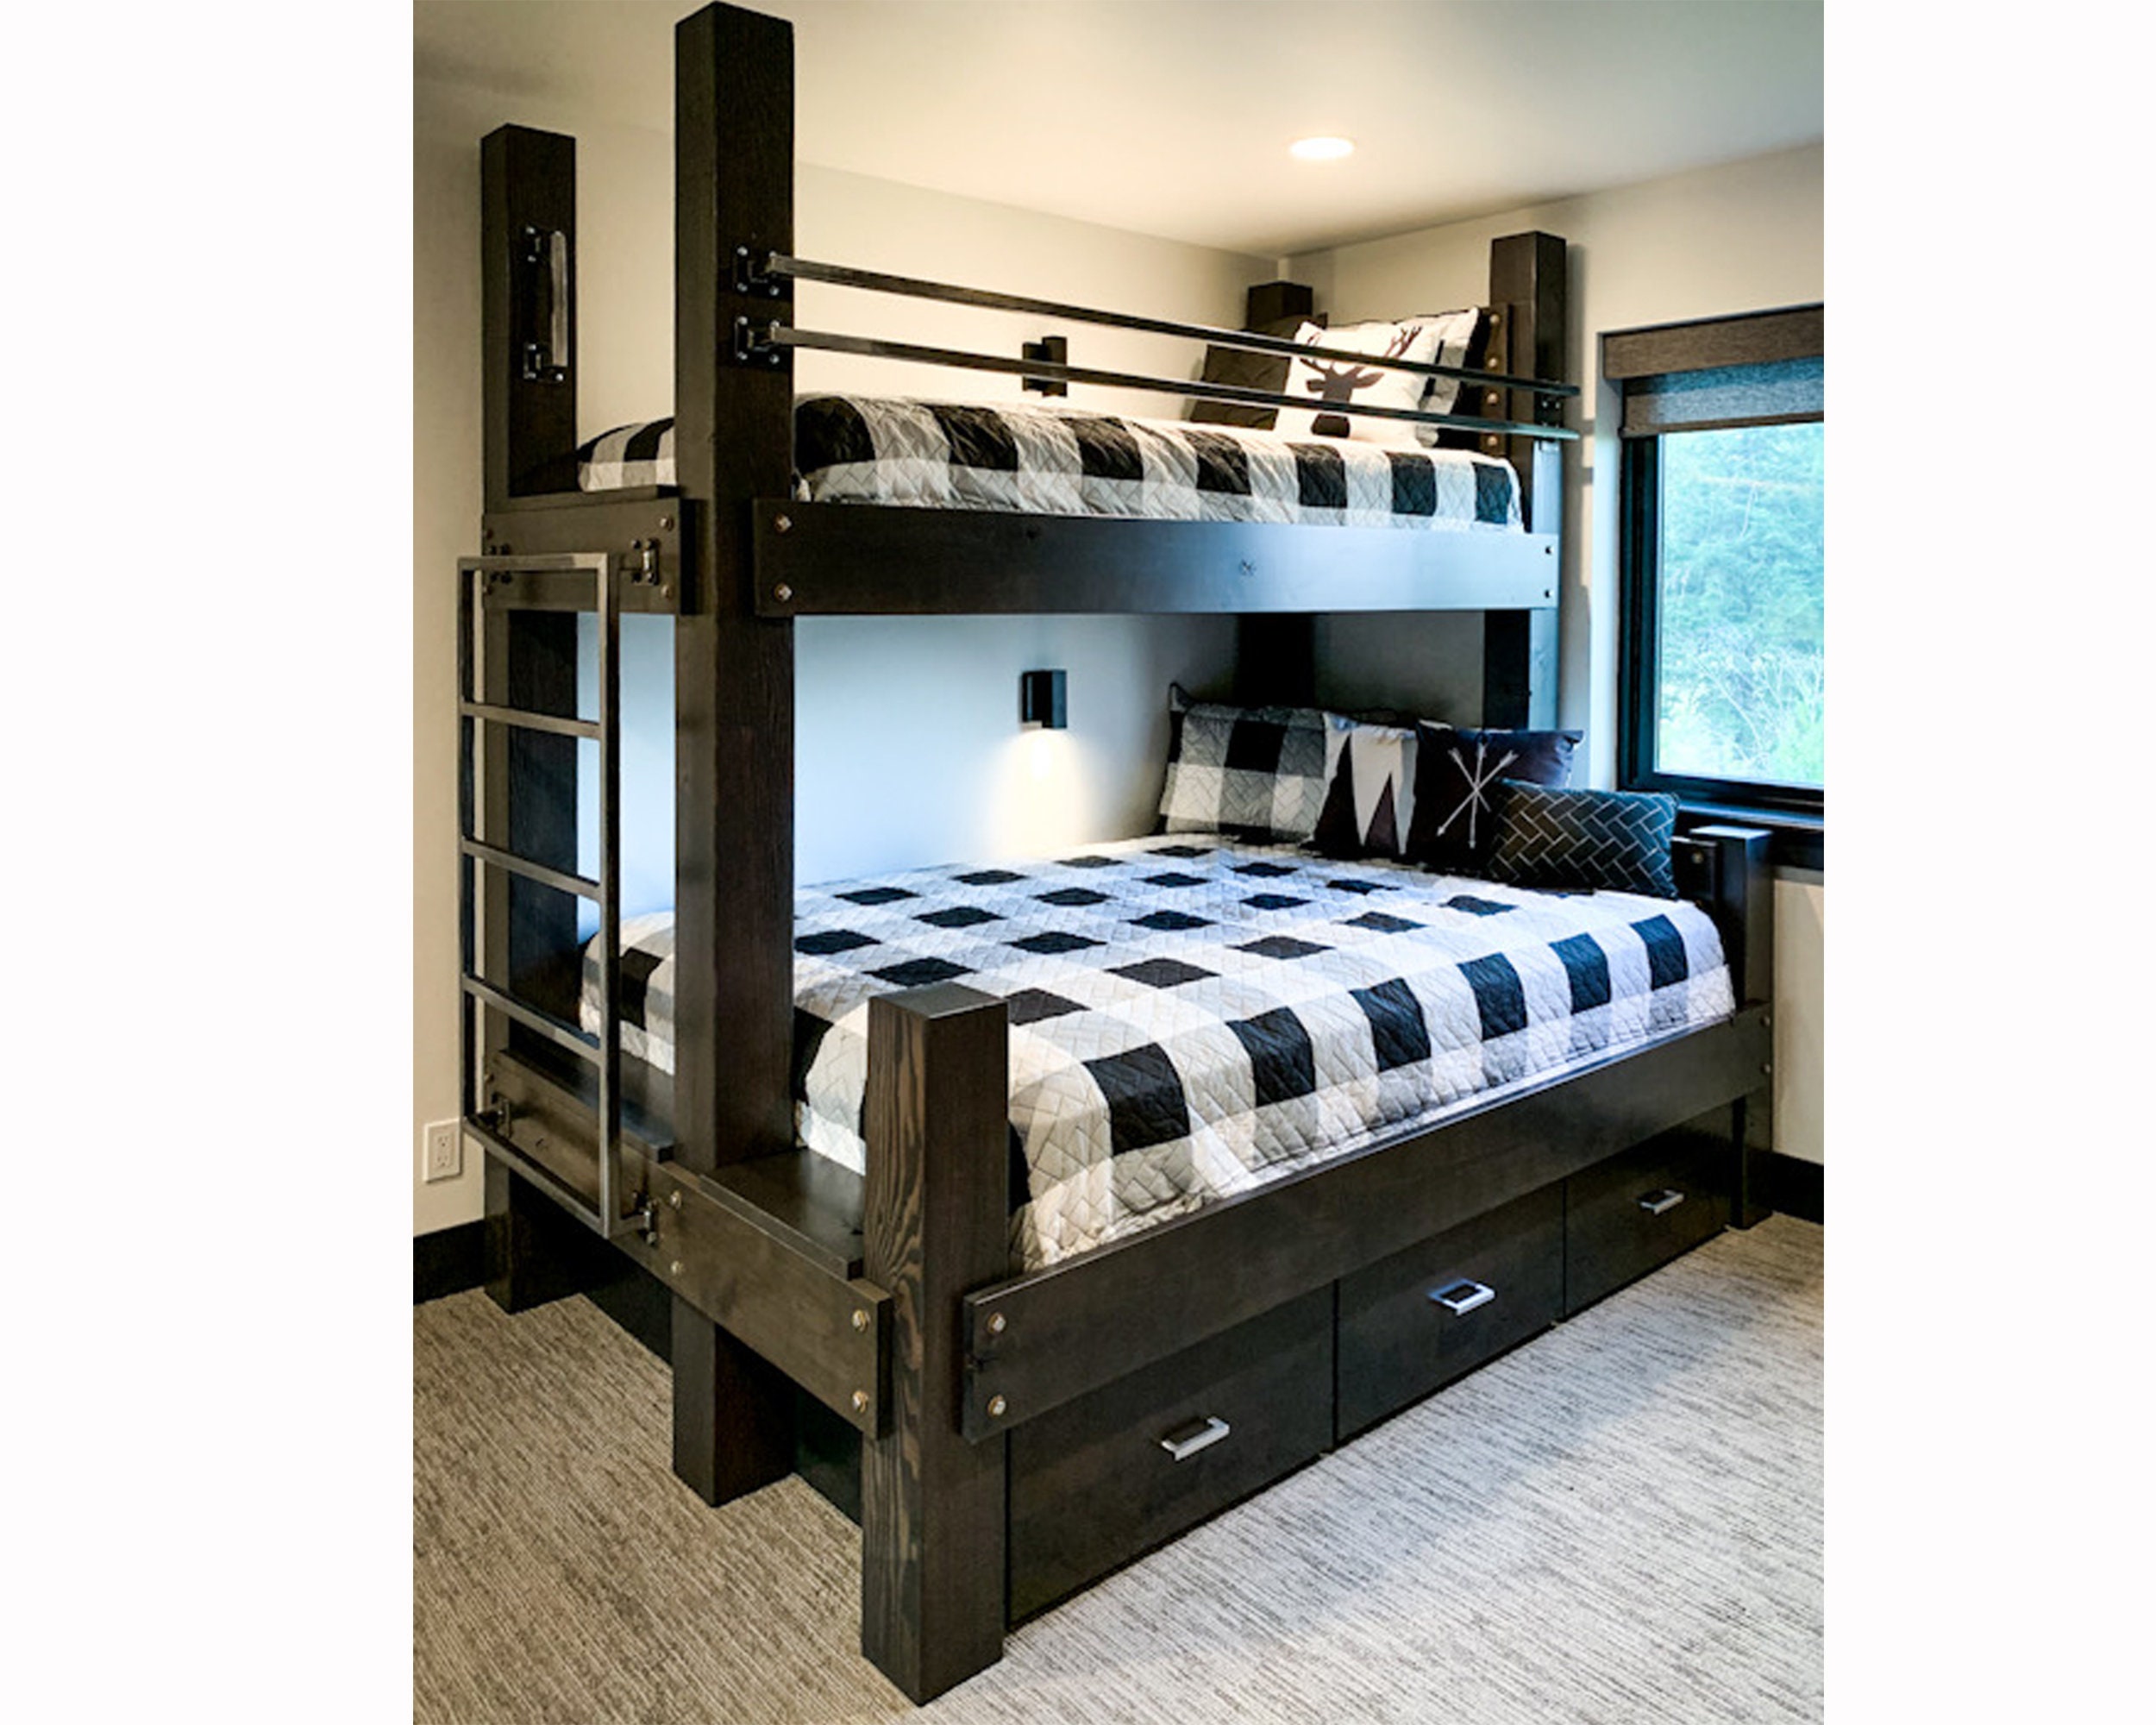 Big Sky Bunk Bed Loft, What Size Bed Frame For A Full Xl